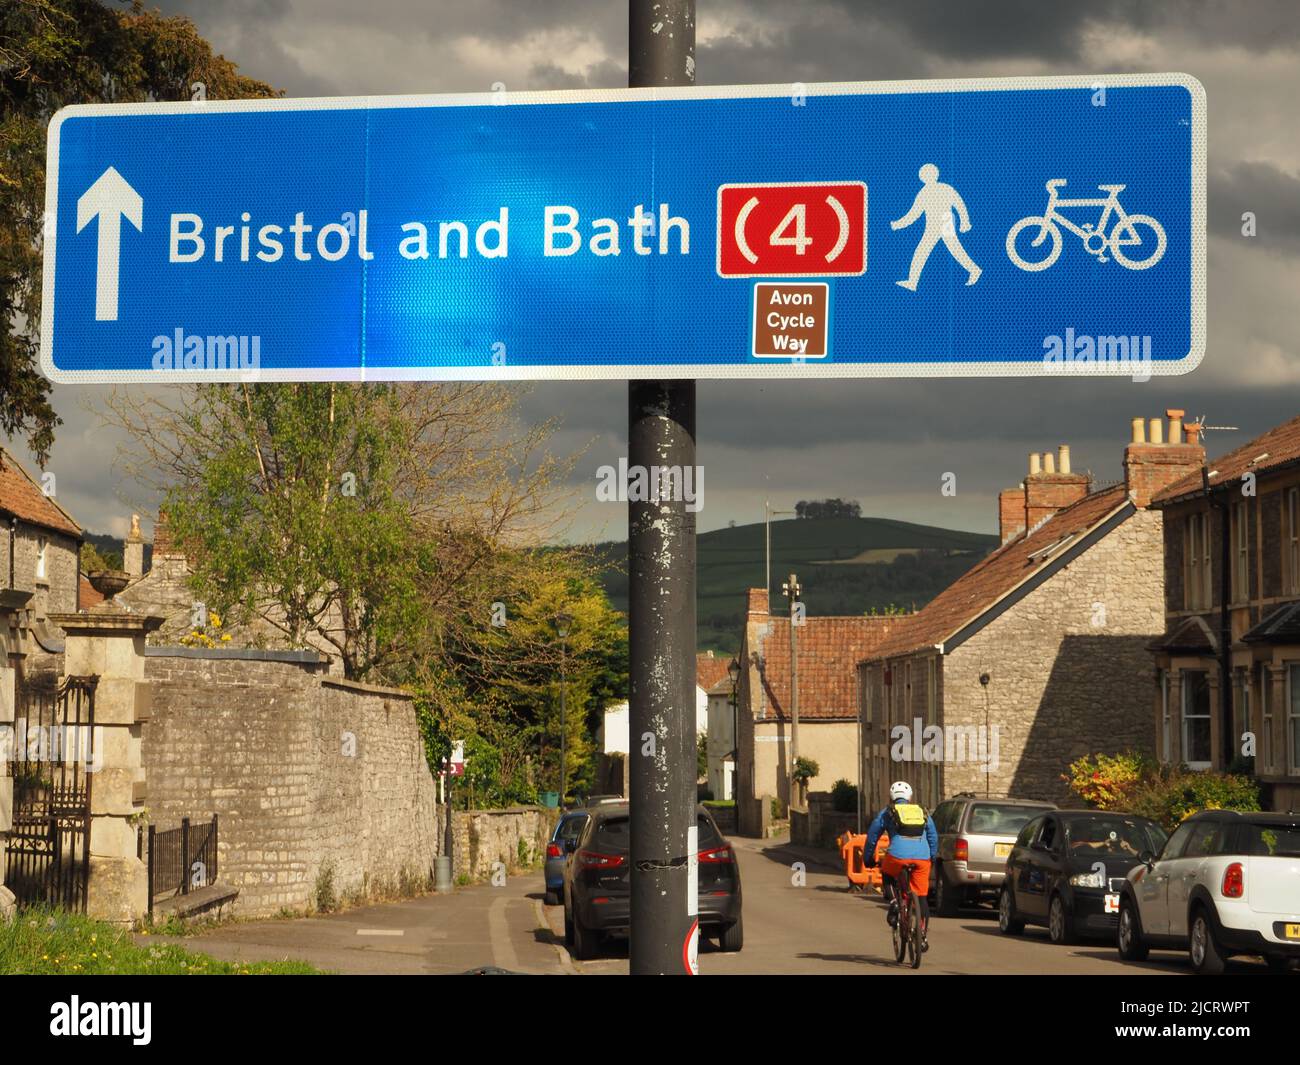 Sign at Salford for the Bristol to Bath cycle walkway, part of National Cycle Network route 4, constructed following a disused railway line. May 2022. Stock Photo